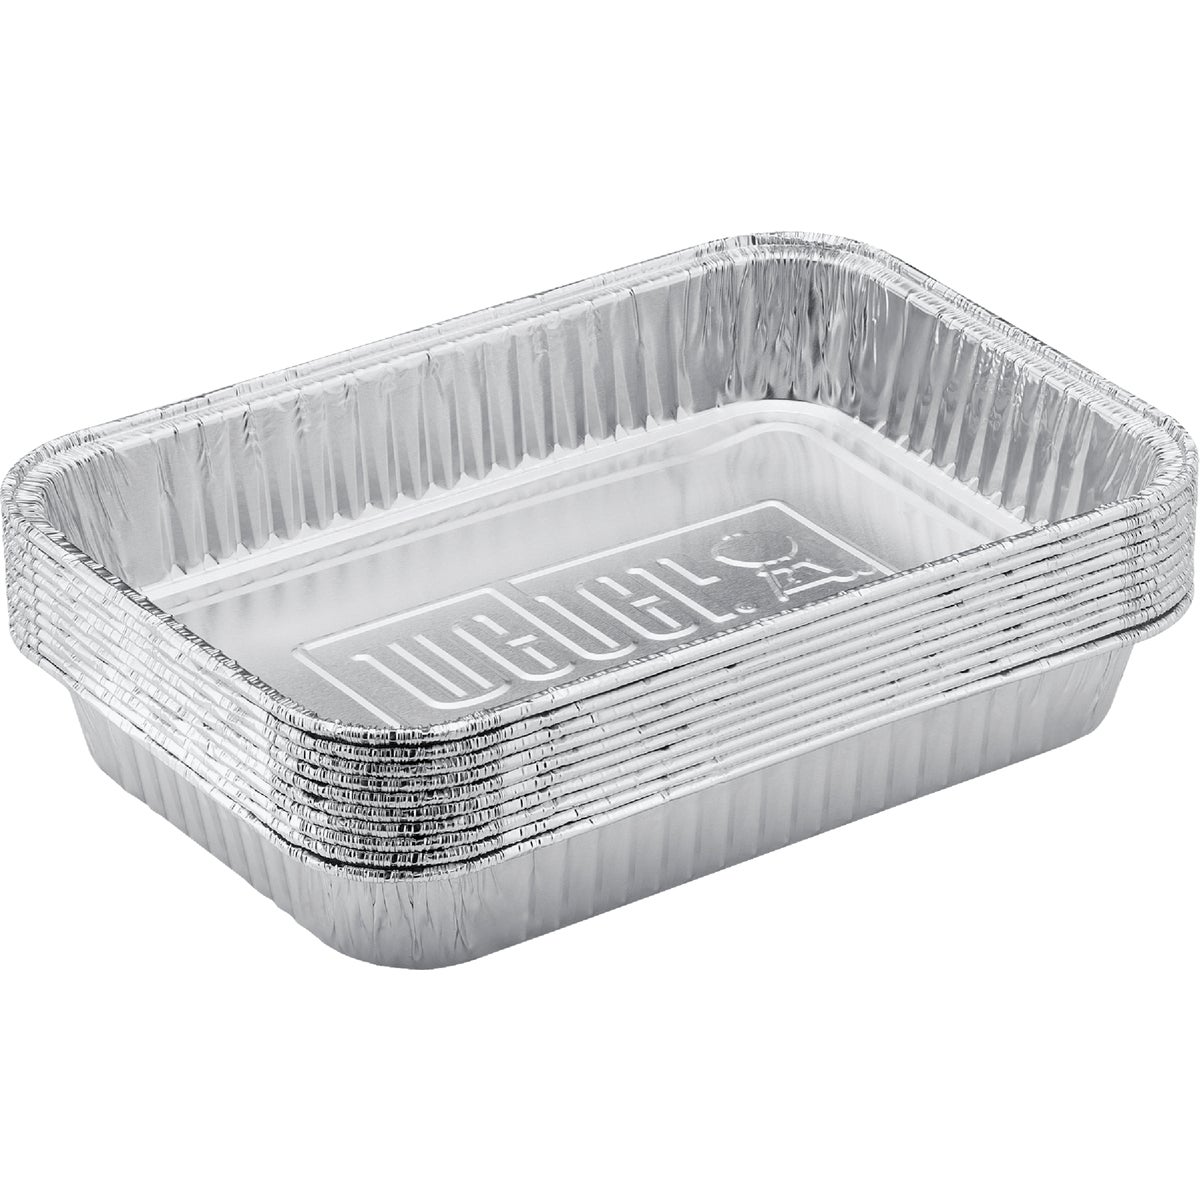 Item 816825, Disposable aluminum pans are designed for indirect cooking.